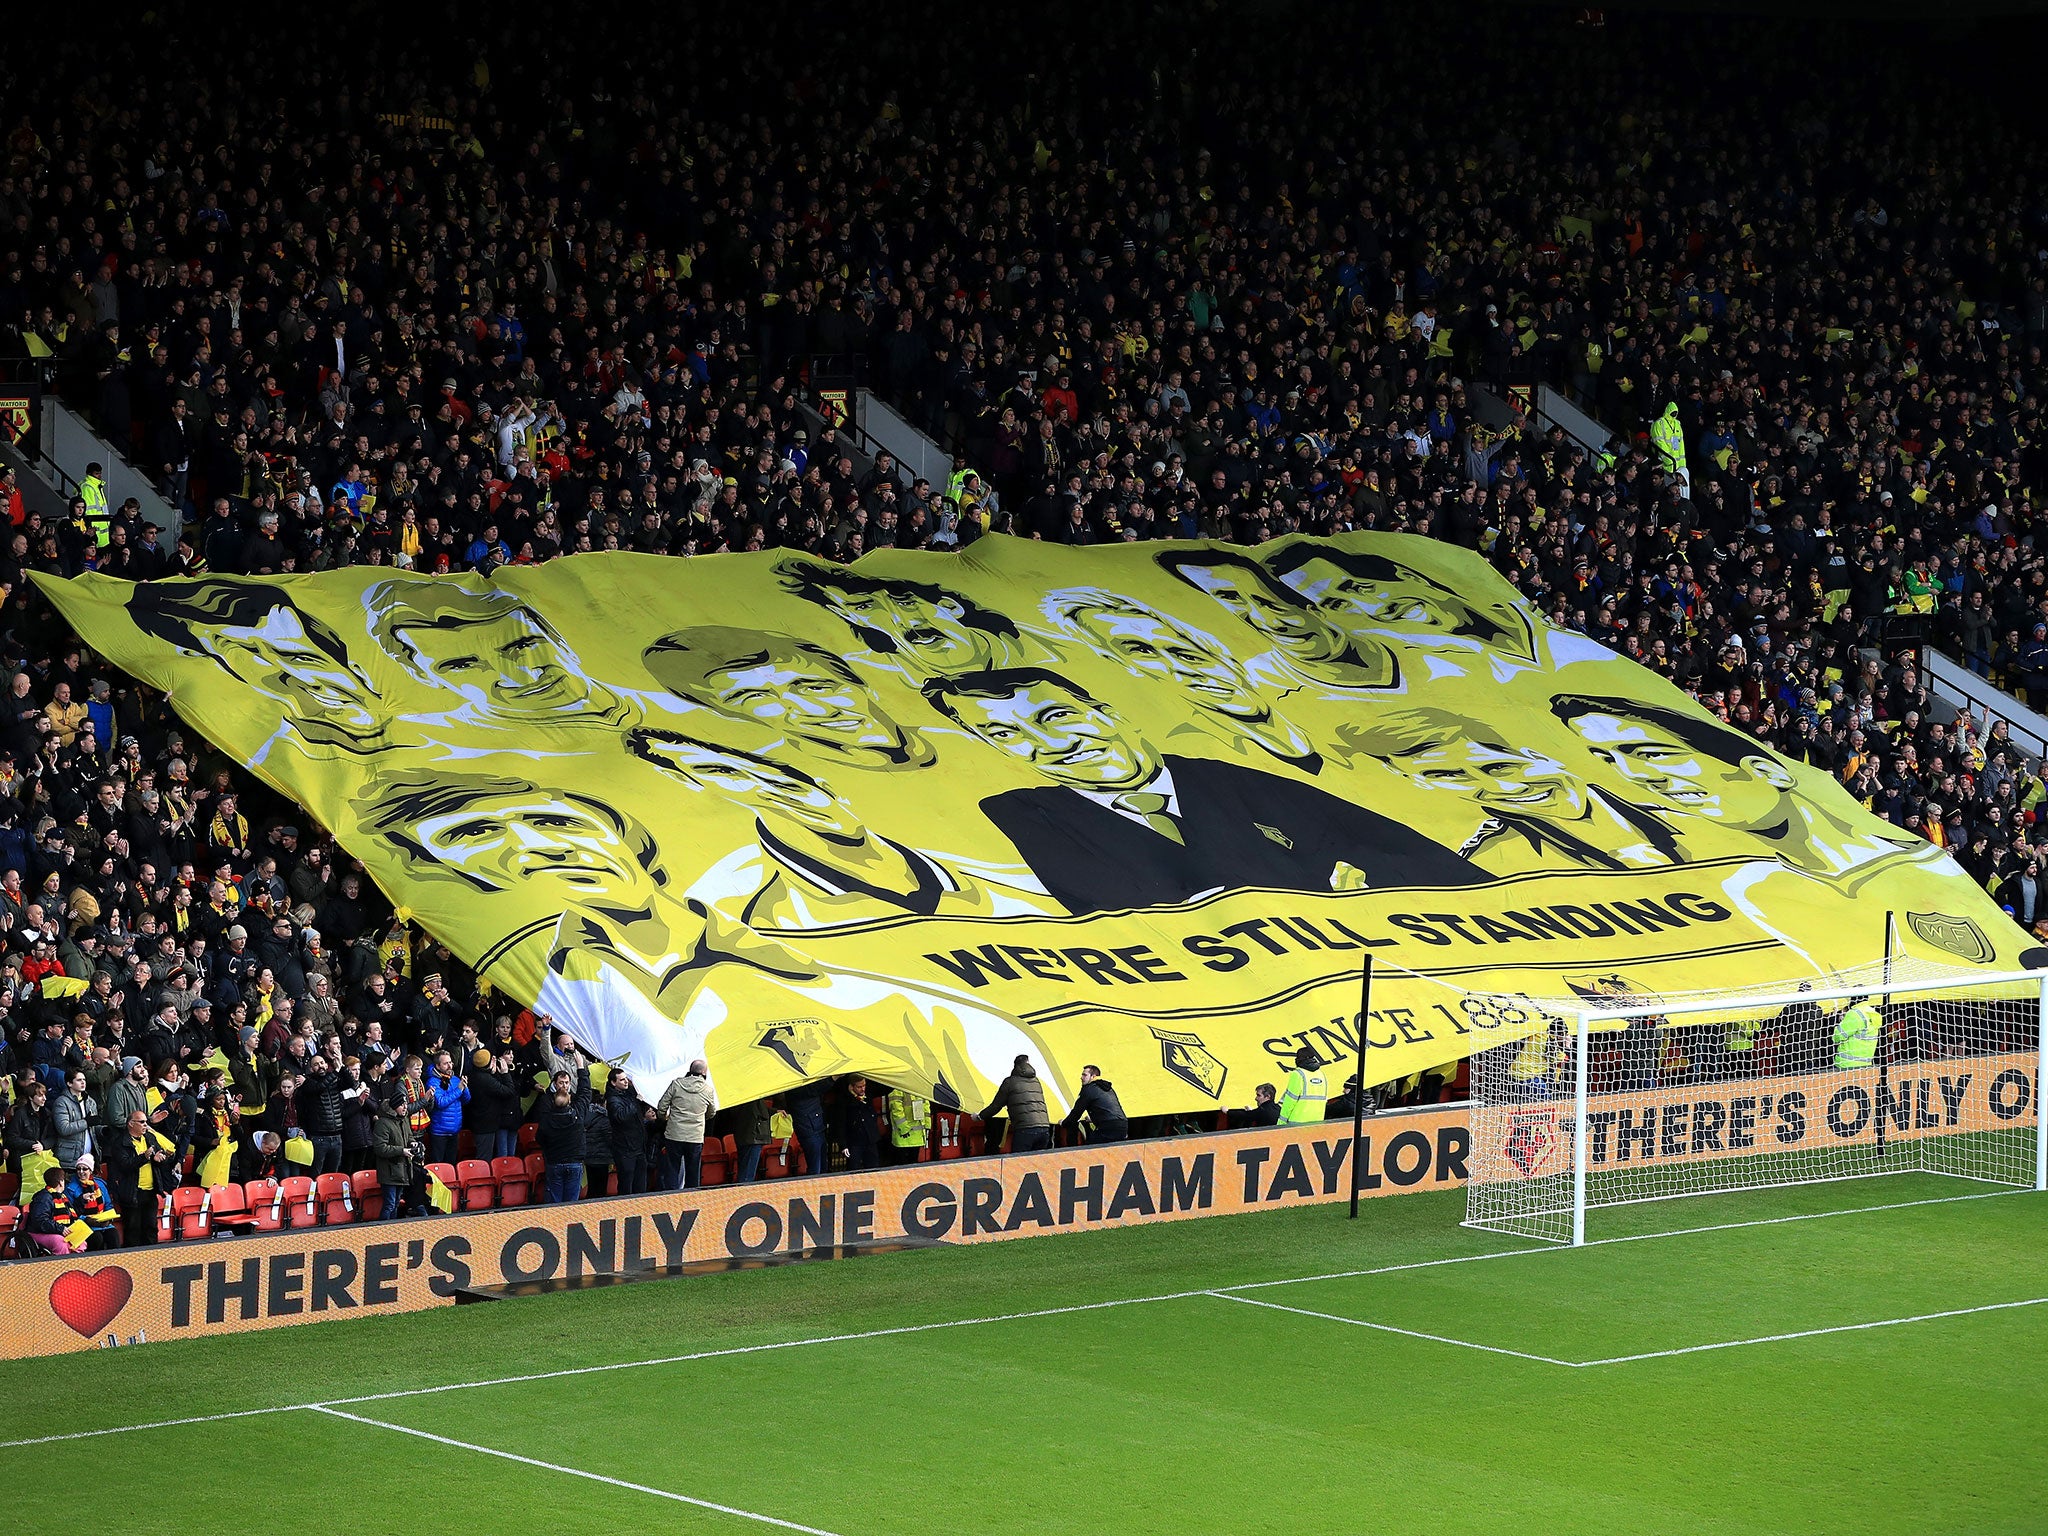 Watford fans pay tribute to Graham Taylor who died on Thursday